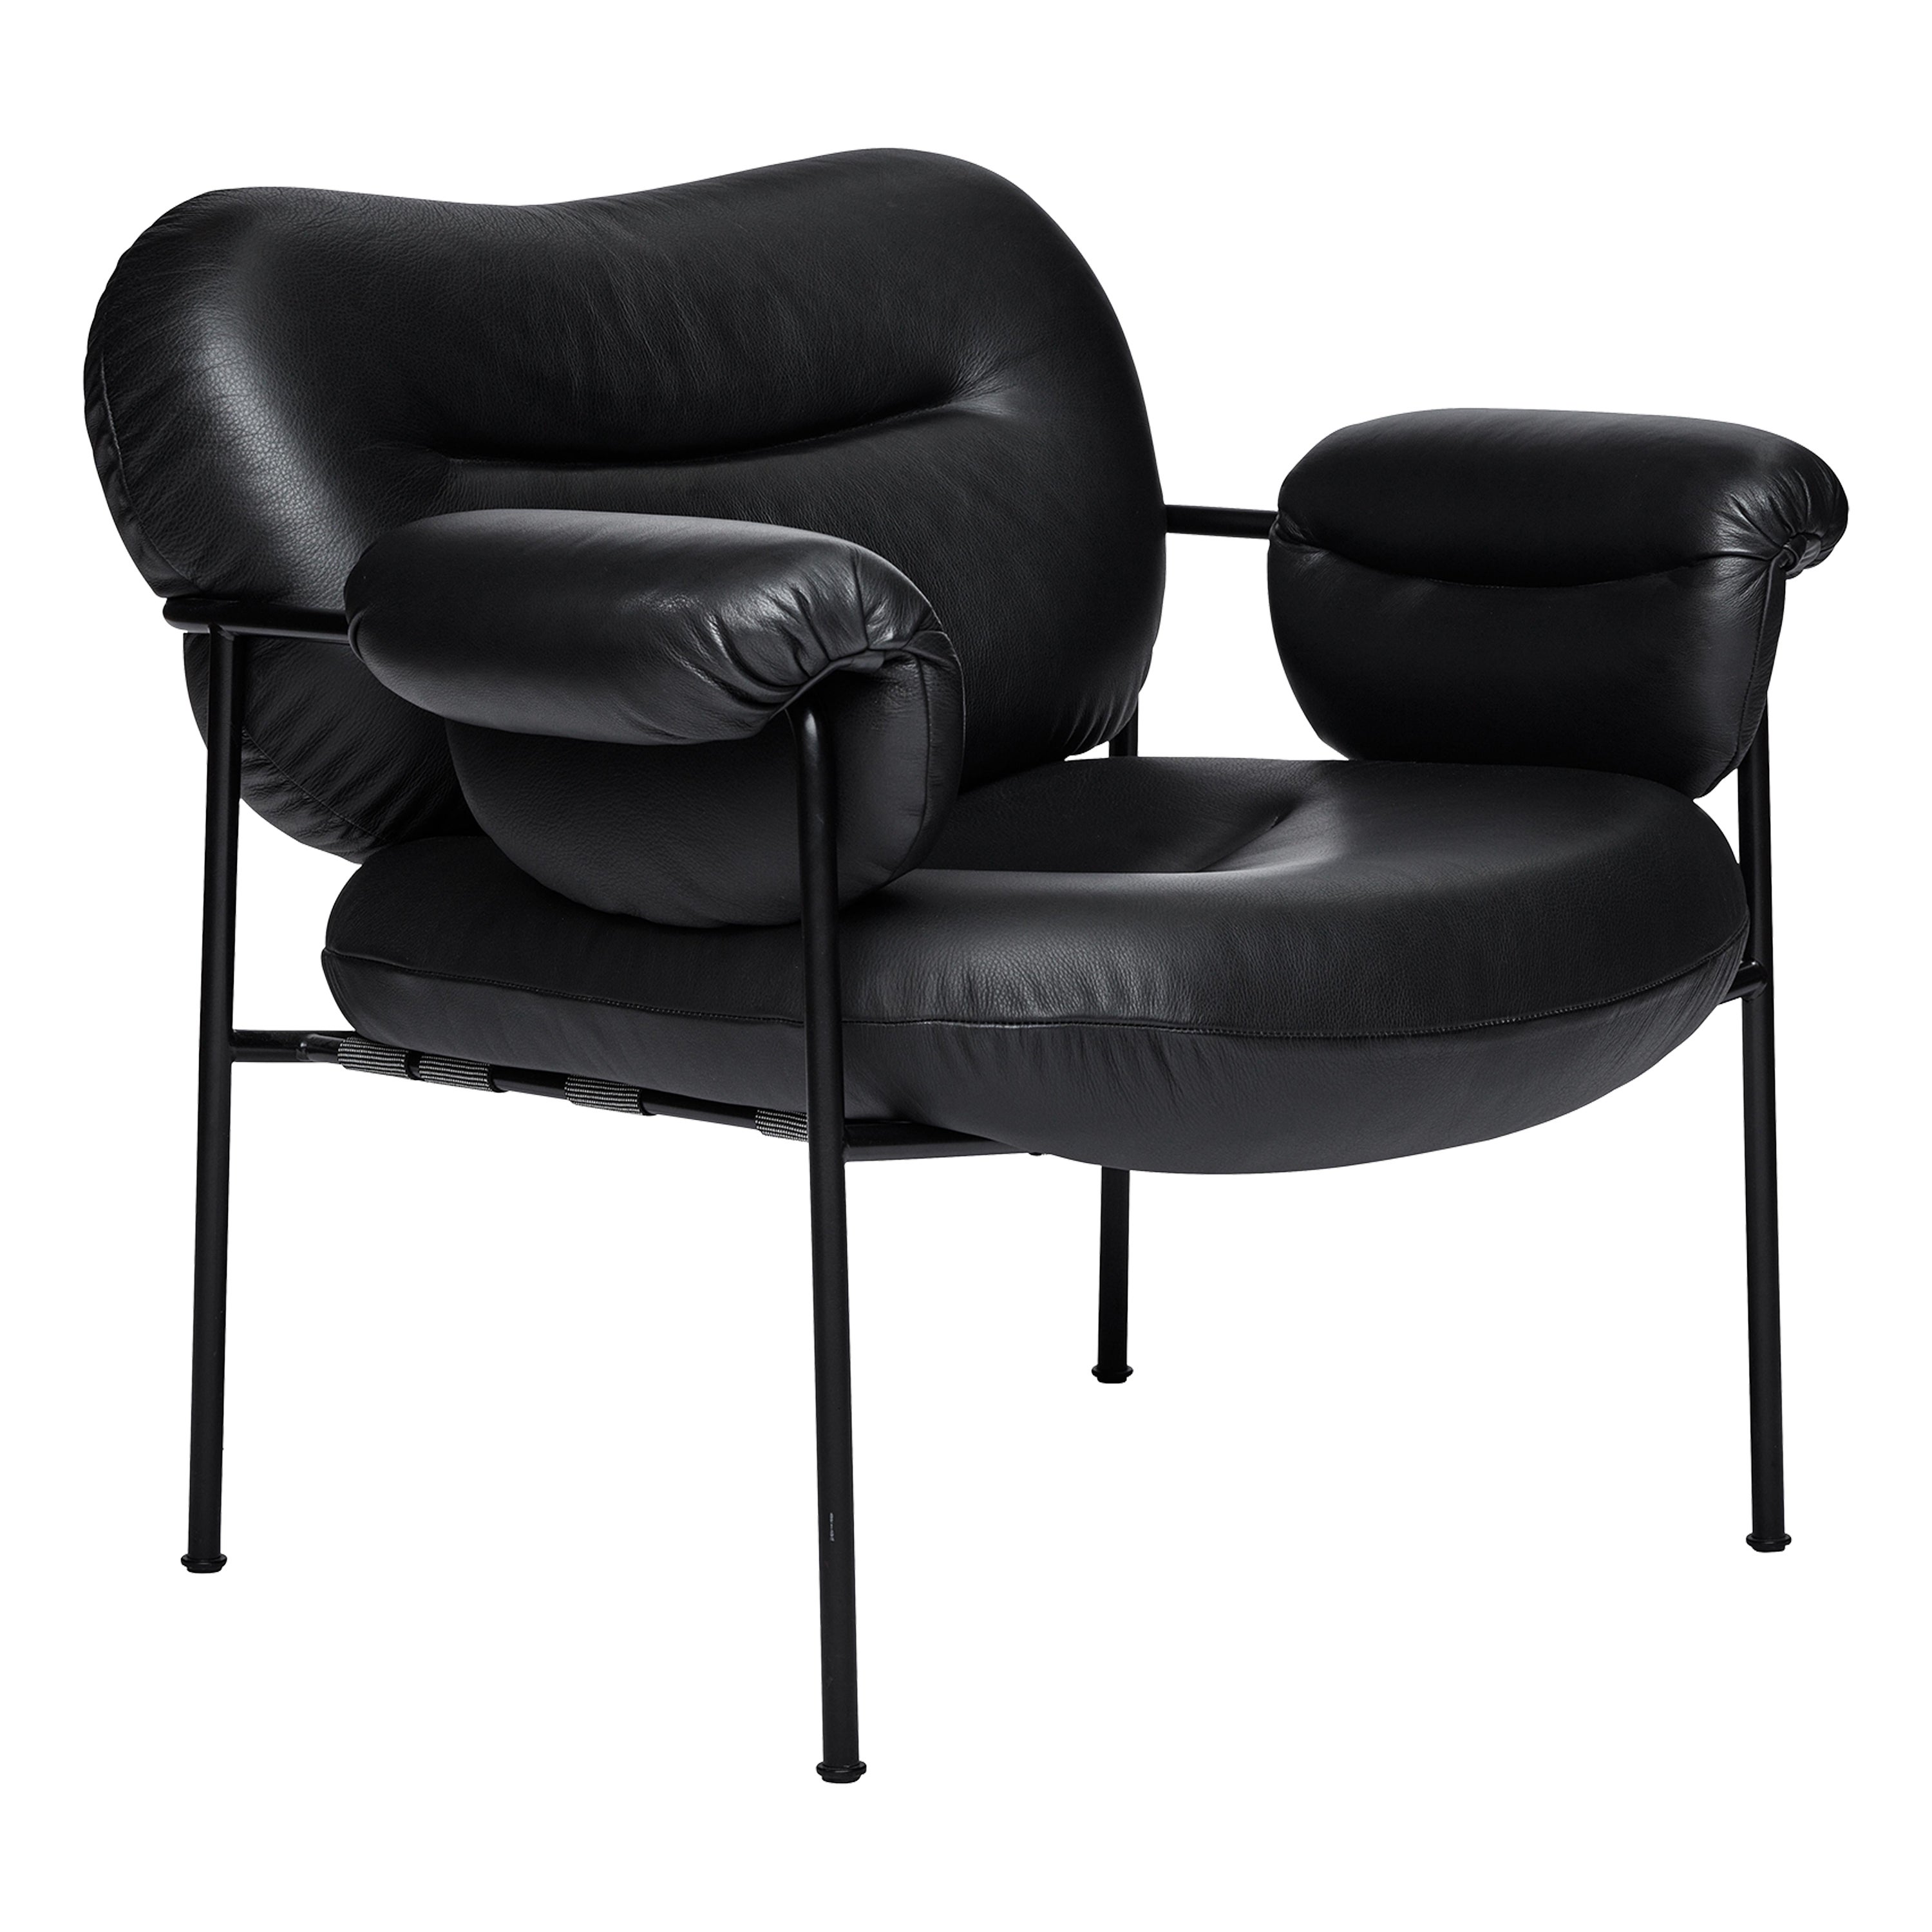 Bollo Armchair by Fogia, Black Leather Elmosoft, Black Steel For Sale at  1stDibs